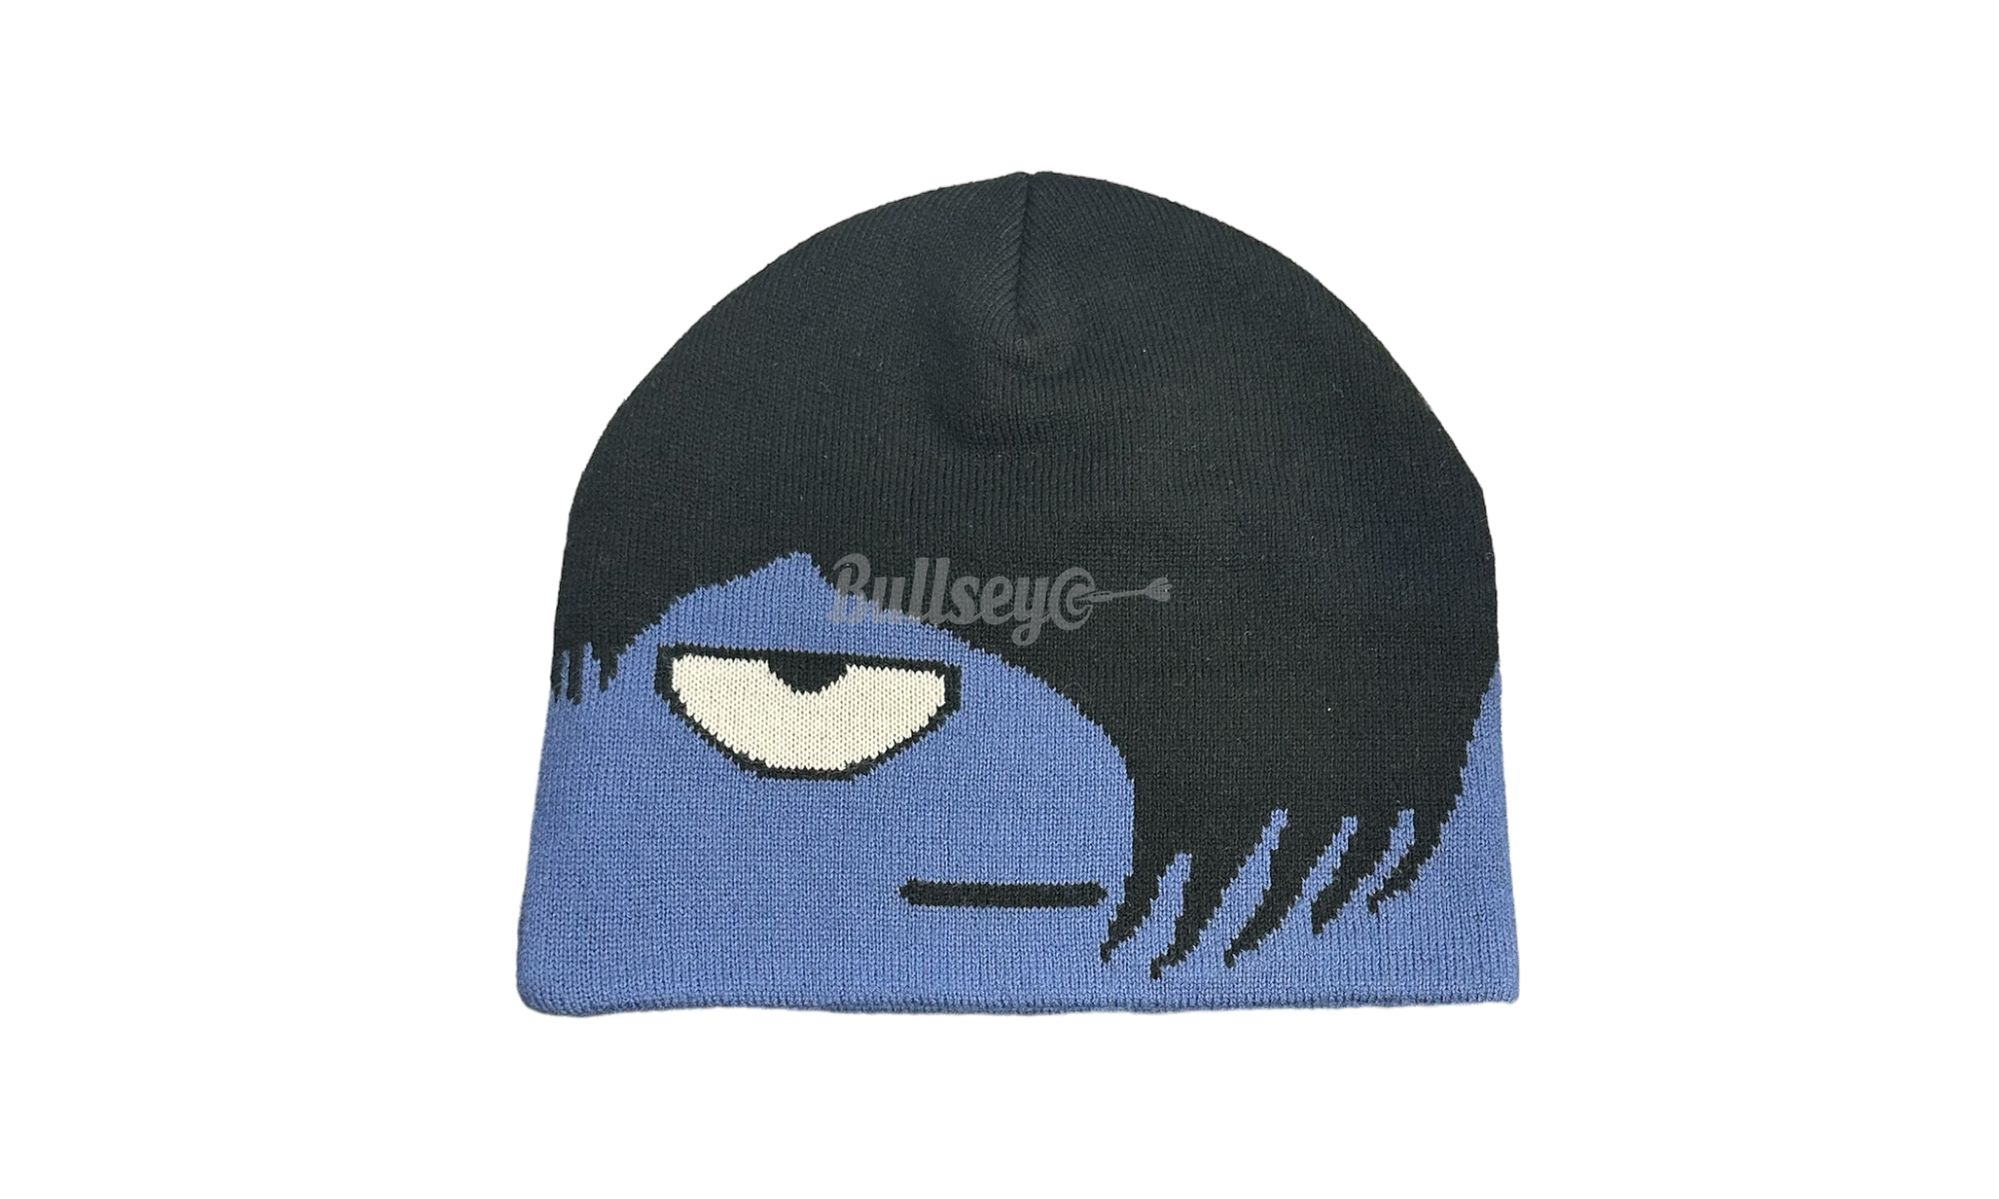 Fuck This Industry Blue/Black Beanie